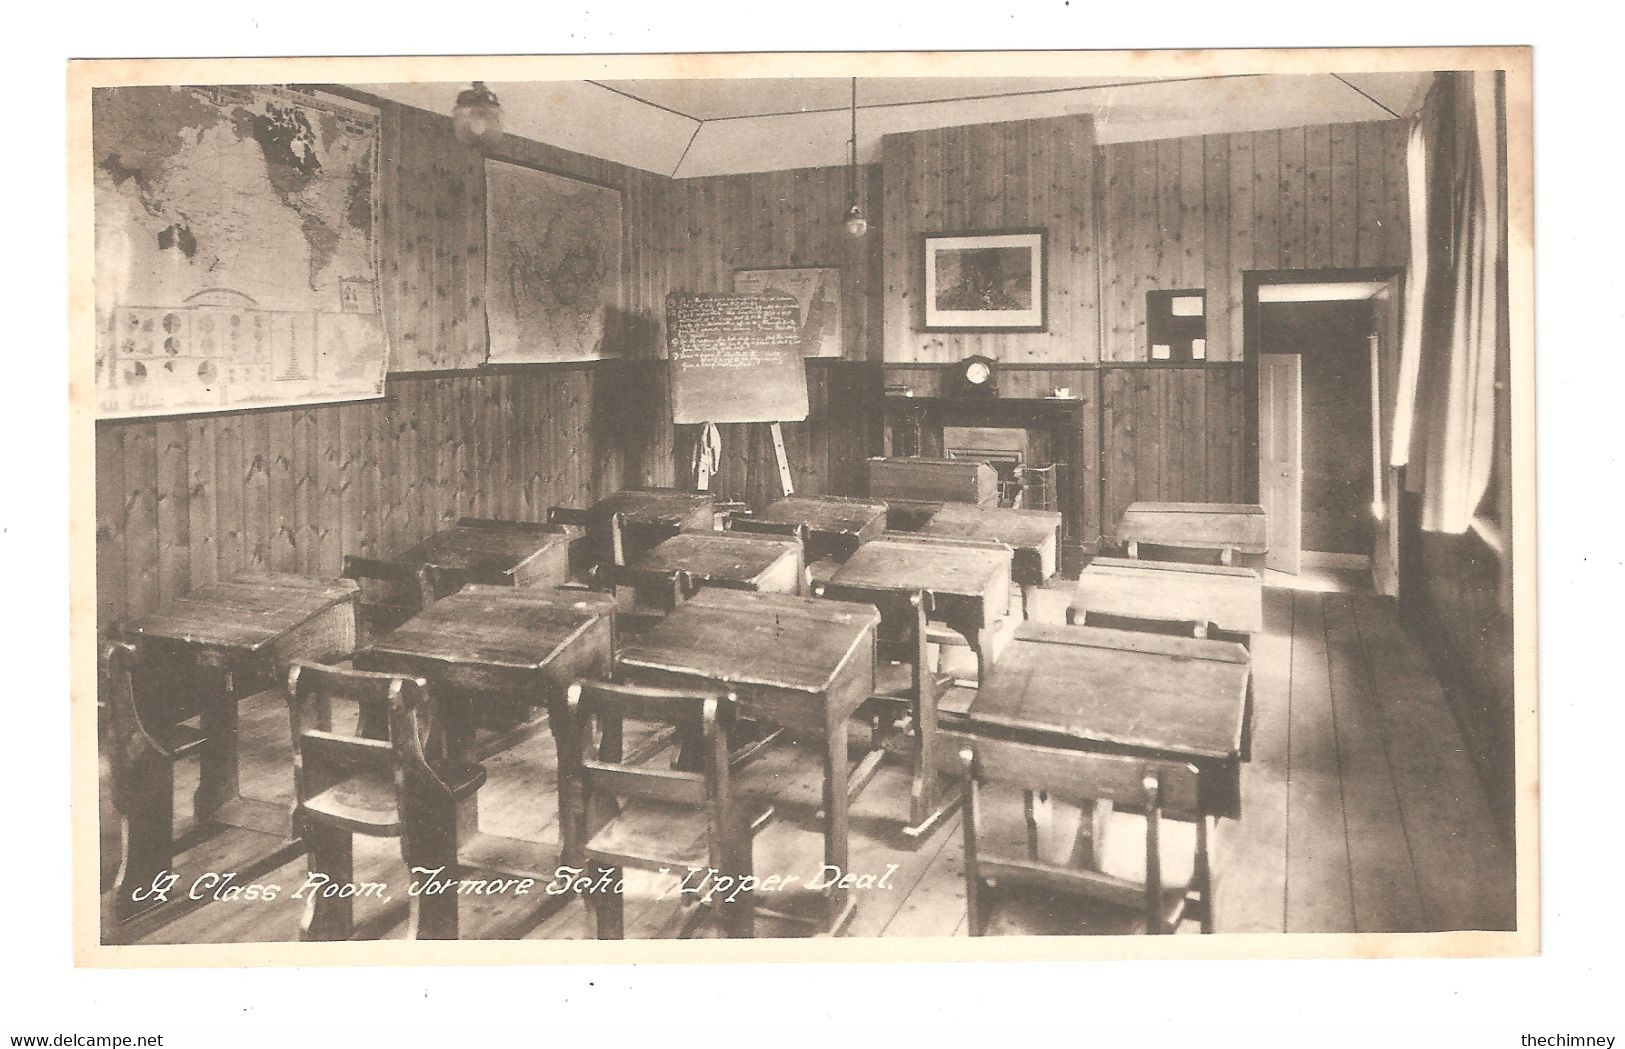 Map On The Left Wall A CLASS ROOM TORMORE SCHOOL UPPER DEAL WALMER KENT UNUSED MARSHALL KEENE & CO - Mapas